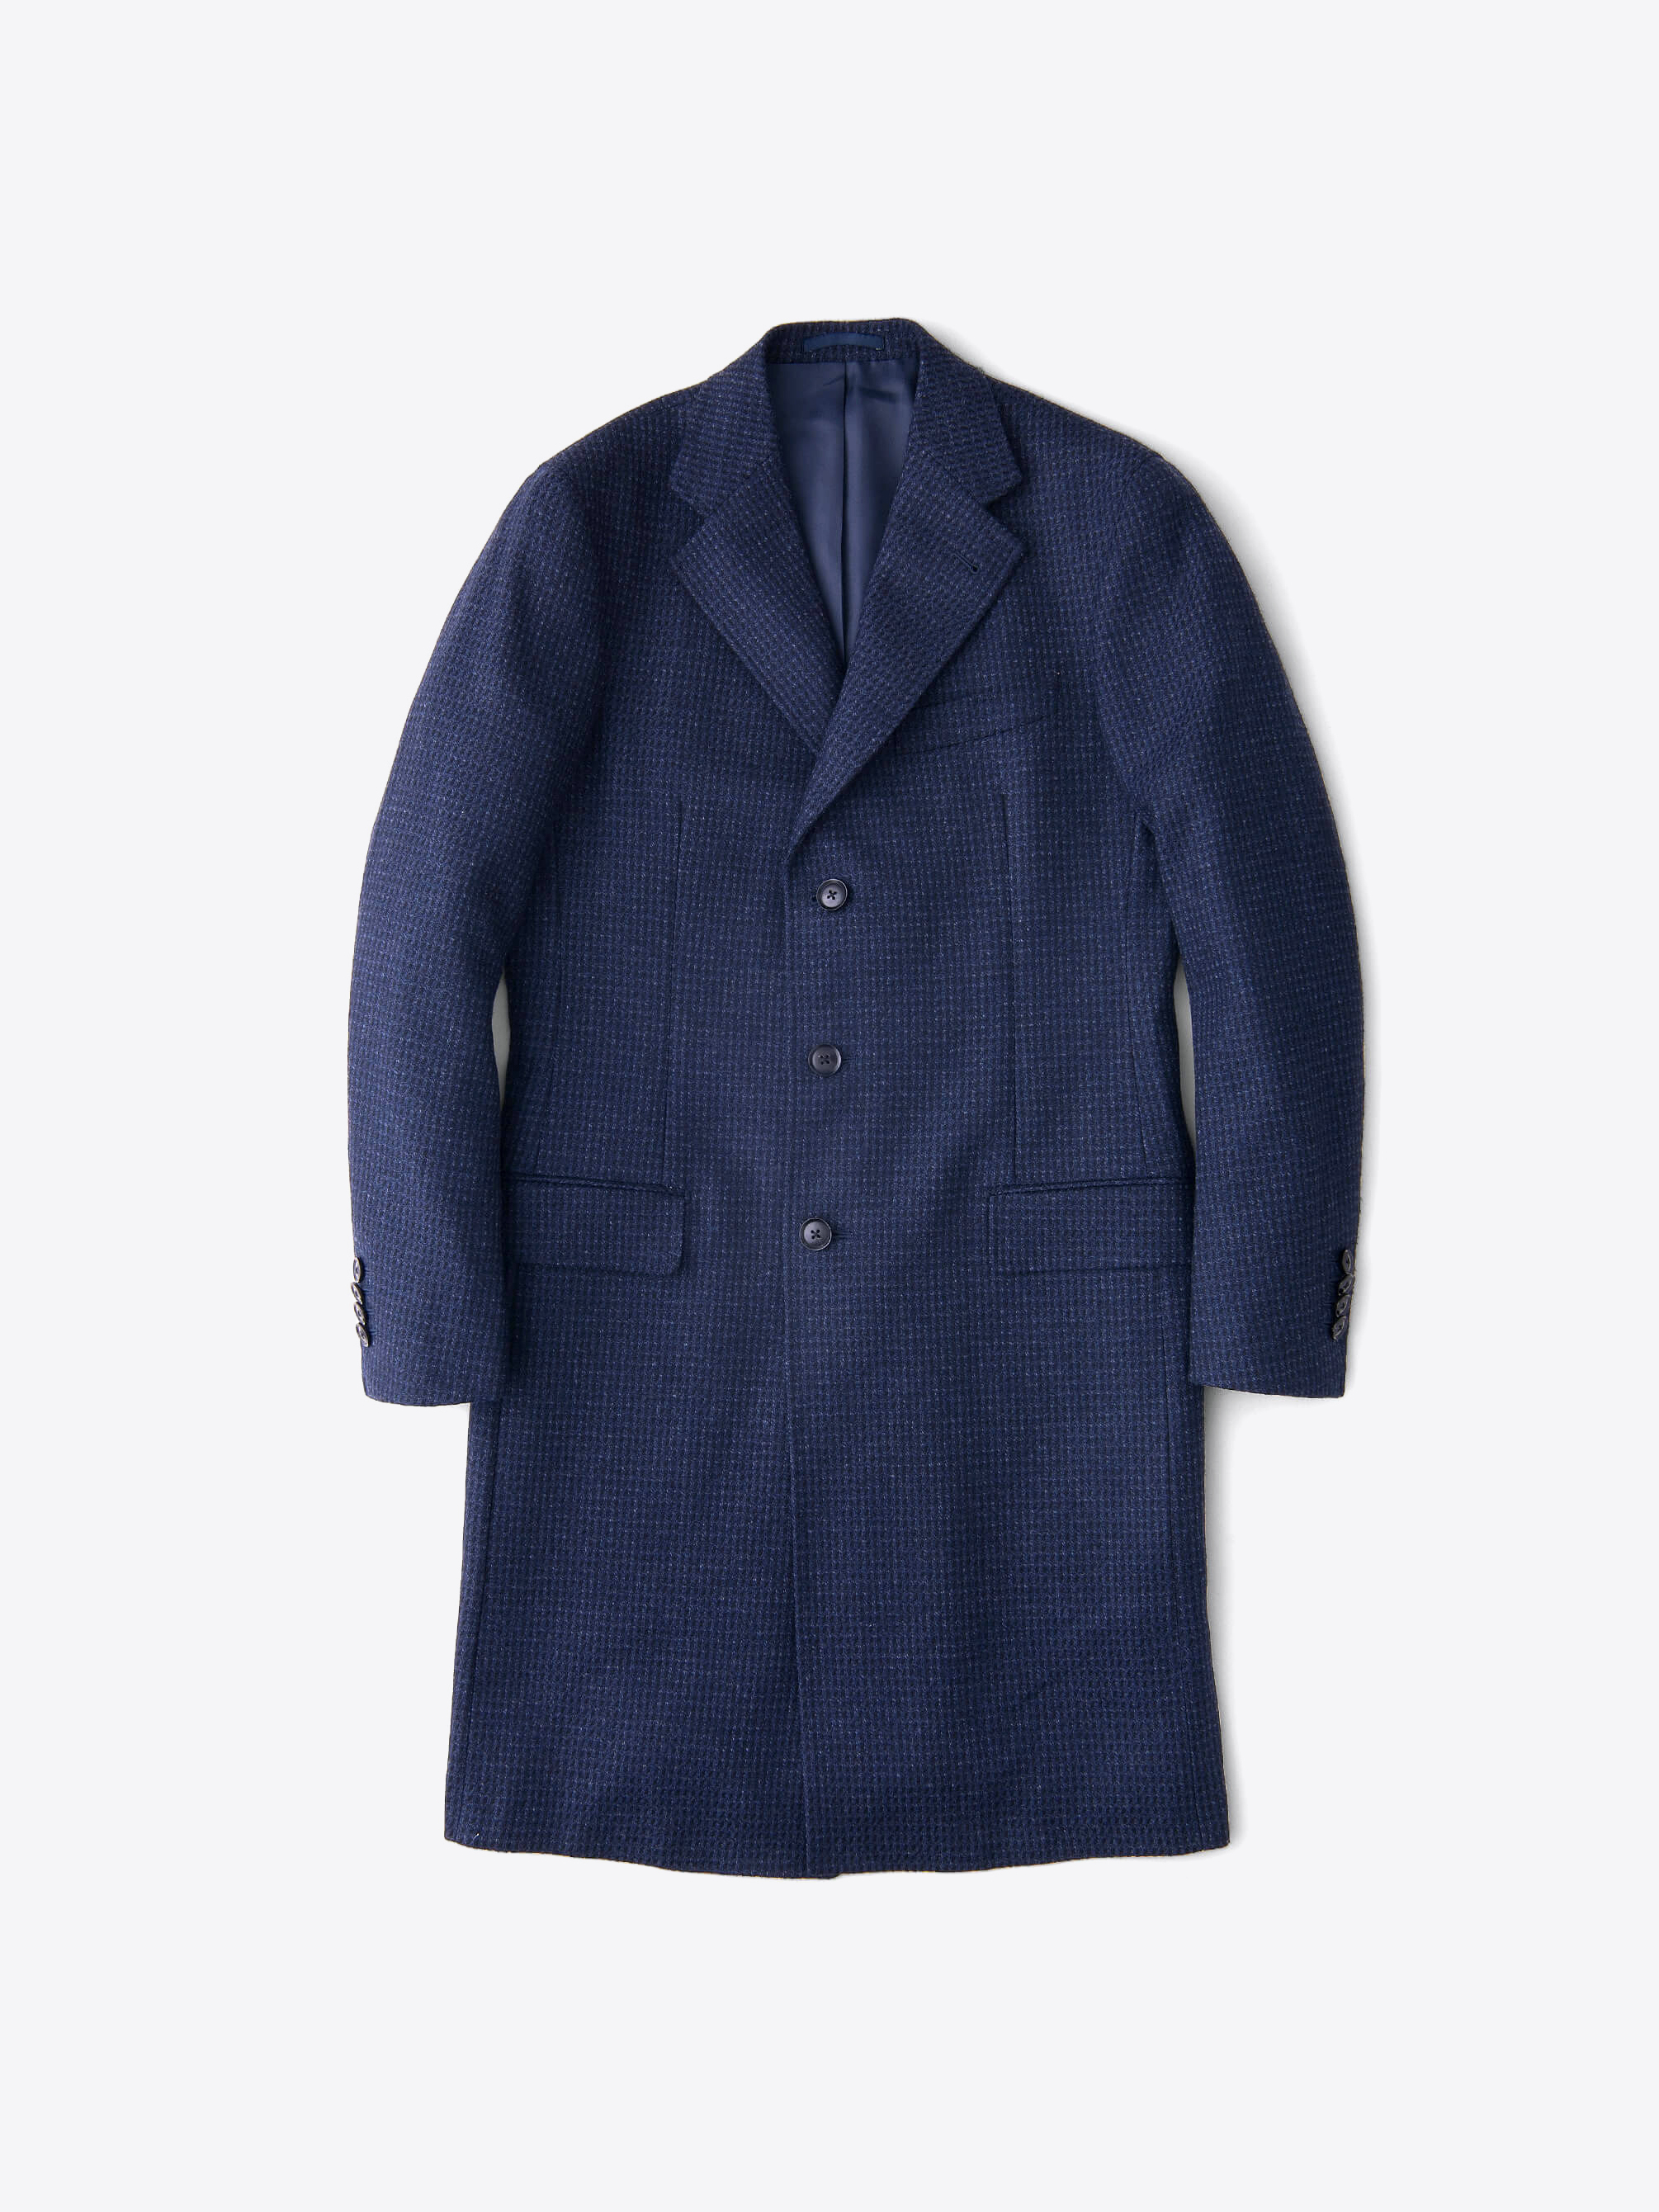 Zoom Image of Bleecker Navy Wool and Cashmere Coat